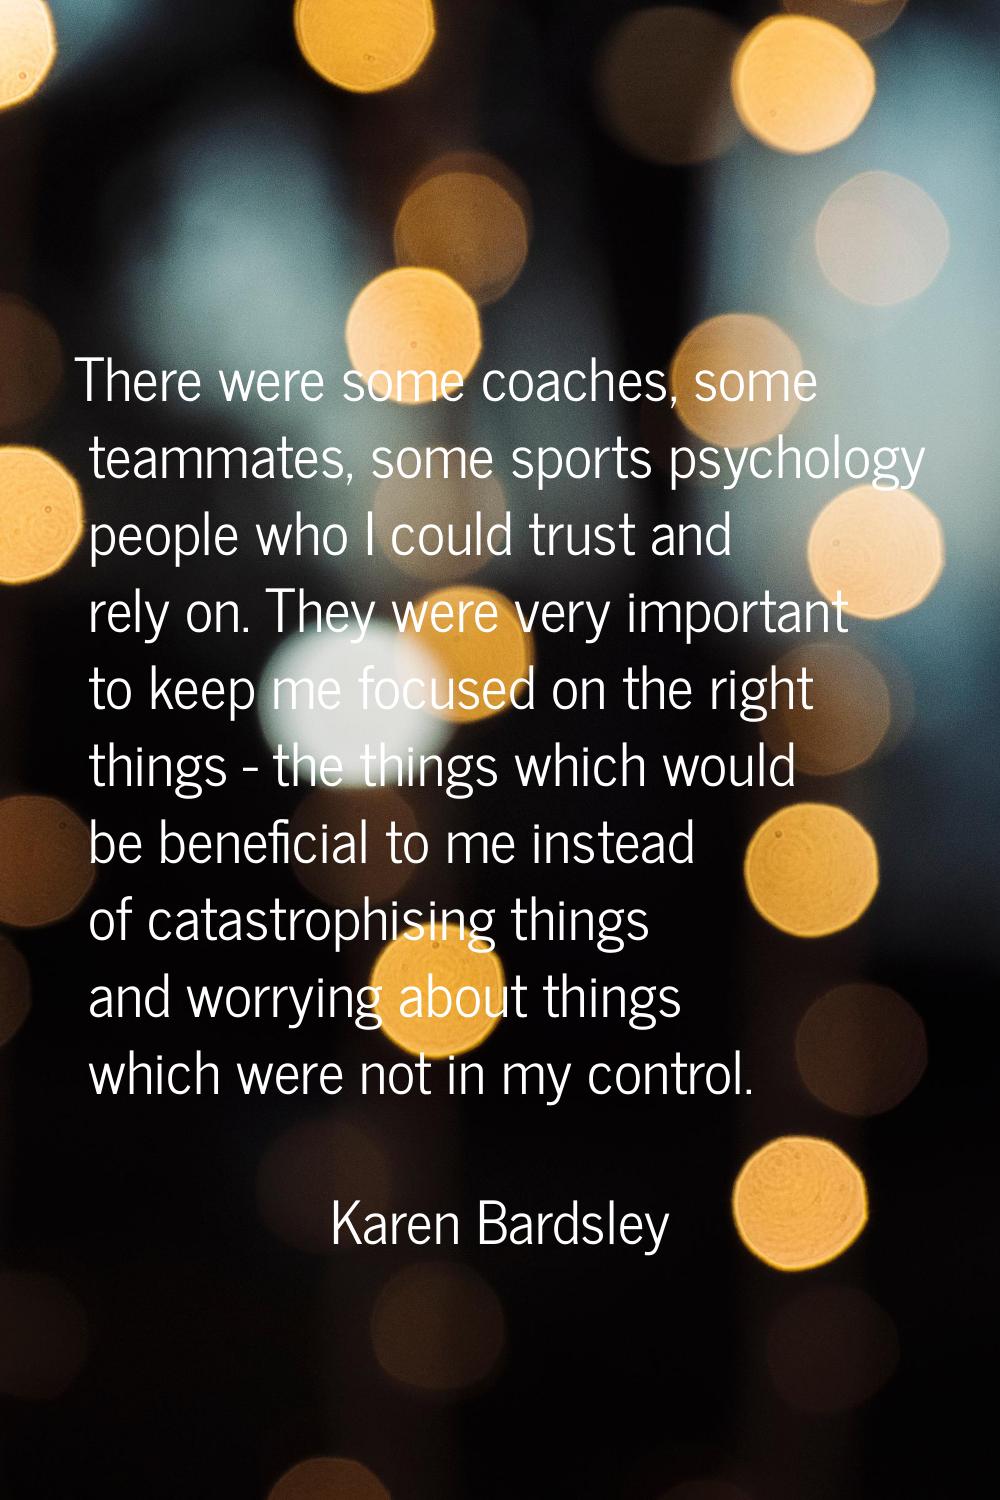 There were some coaches, some teammates, some sports psychology people who I could trust and rely o